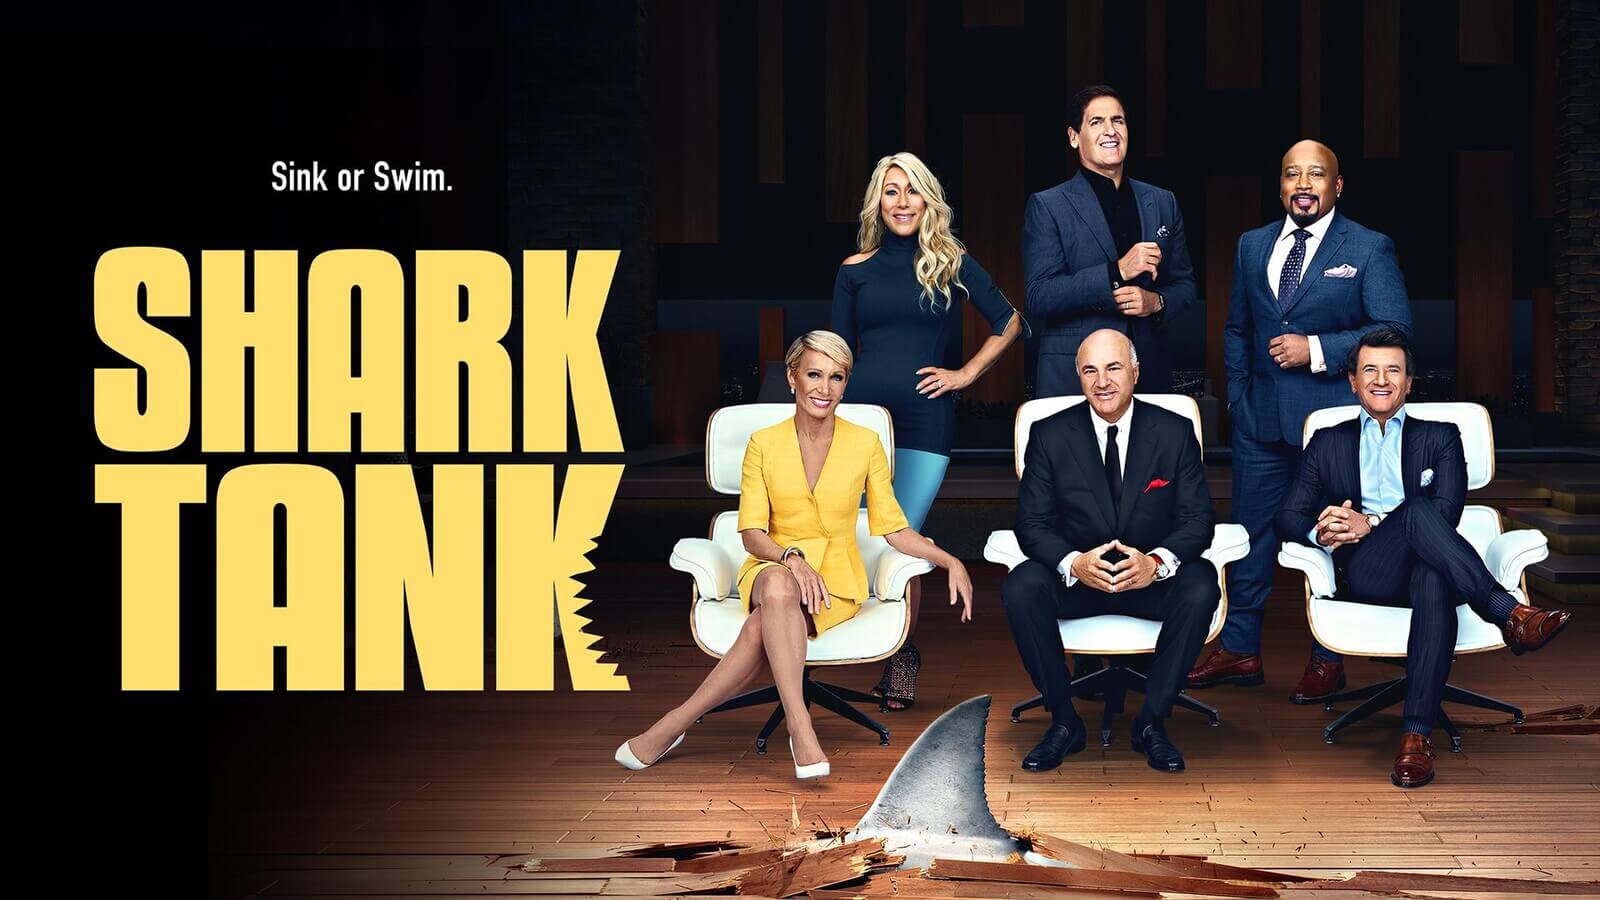 Investor Pitch Presentation Lessons from Shark Tank